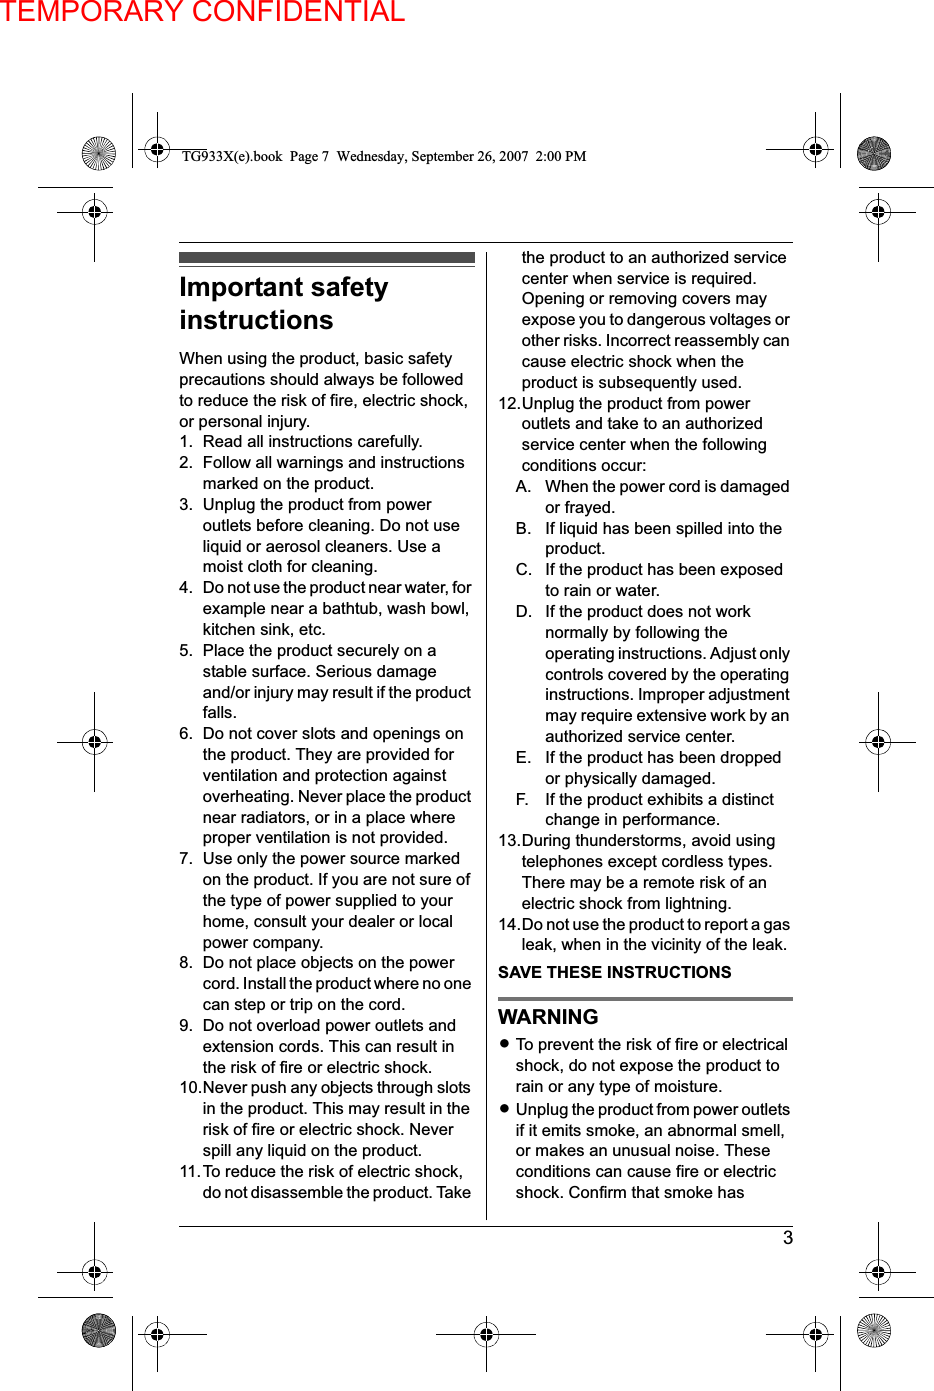 TEMPORARY CONFIDENTIAL3Important safetyinstructionsWhen using the product, basic safetyprecautions should always be followedto reduce the risk of fire, electric shock,or personal injury.1. Read all instructions carefully.2. Follow all warnings and instructionsmarked on the product.3. Unplug the product from poweroutlets before cleaning. Do not useliquid or aerosol cleaners. Use amoist cloth for cleaning.4. Do not use the product near water, forexample near a bathtub, wash bowl,kitchen sink, etc.5. Place the product securely on astable surface. Serious damageand/or injury may result if the productfalls.6. Do not cover slots and openings onthe product. They are provided forventilation and protection againstoverheating. Never place the productnear radiators, or in a place whereproper ventilation is not provided.7. Use only the power source markedon the product. If you are not sure ofthe type of power supplied to yourhome, consult your dealer or localpower company.8. Do not place objects on the powercord. Install the product where no onecan step or trip on the cord.9. Do not overload power outlets andextension cords. This can result inthe risk of fire or electric shock.10.Never push any objects through slotsin the product. This may result in therisk of fire or electric shock. Neverspill any liquid on the product.11.To reduce the risk of electric shock,do not disassemble the product. Takethe product to an authorized servicecenter when service is required.Opening or removing covers mayexpose you to dangerous voltages orother risks. Incorrect reassembly cancause electric shock when theproduct is subsequently used.12.Unplug the product from poweroutlets and take to an authorizedservice center when the followingconditions occur:A. When the power cord is damagedor frayed.B. If liquid has been spilled into theproduct.C. If the product has been exposedto rain or water.D. If the product does not worknormally by following theoperating instructions. Adjust onlycontrols covered by the operatinginstructions. Improper adjustmentmay require extensive work by anauthorized service center.E. If the product has been droppedor physically damaged.F. If the product exhibits a distinctchange in performance.13.During thunderstorms, avoid usingtelephones except cordless types.There may be a remote risk of anelectric shock from lightning.14.Do not use the product to report a gasleak, when in the vicinity of the leak.SAVE THESE INSTRUCTIONSWARNINGLTo prevent the risk of fire or electricalshock, do not expose the product torain or any type of moisture.LUnplug the product from power outletsif it emits smoke, an abnormal smell,or makes an unusual noise. Theseconditions can cause fire or electricshock. Confirm that smoke hasTG933X(e).book Page 7 Wednesday, September 26, 2007 2:00 PM